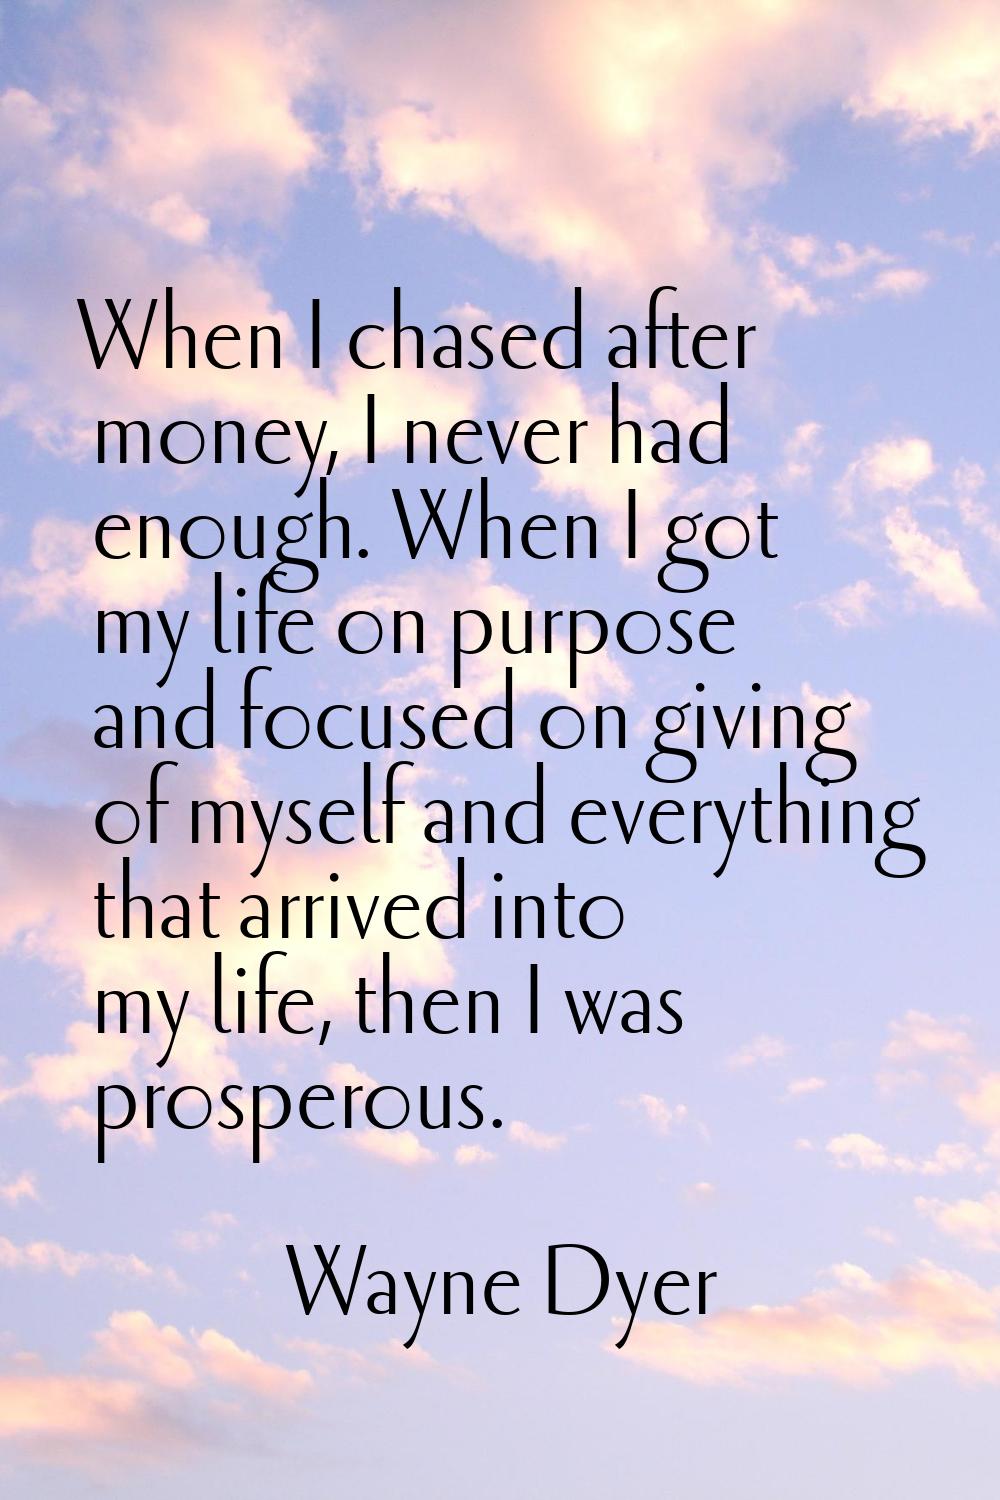 When I chased after money, I never had enough. When I got my life on purpose and focused on giving 